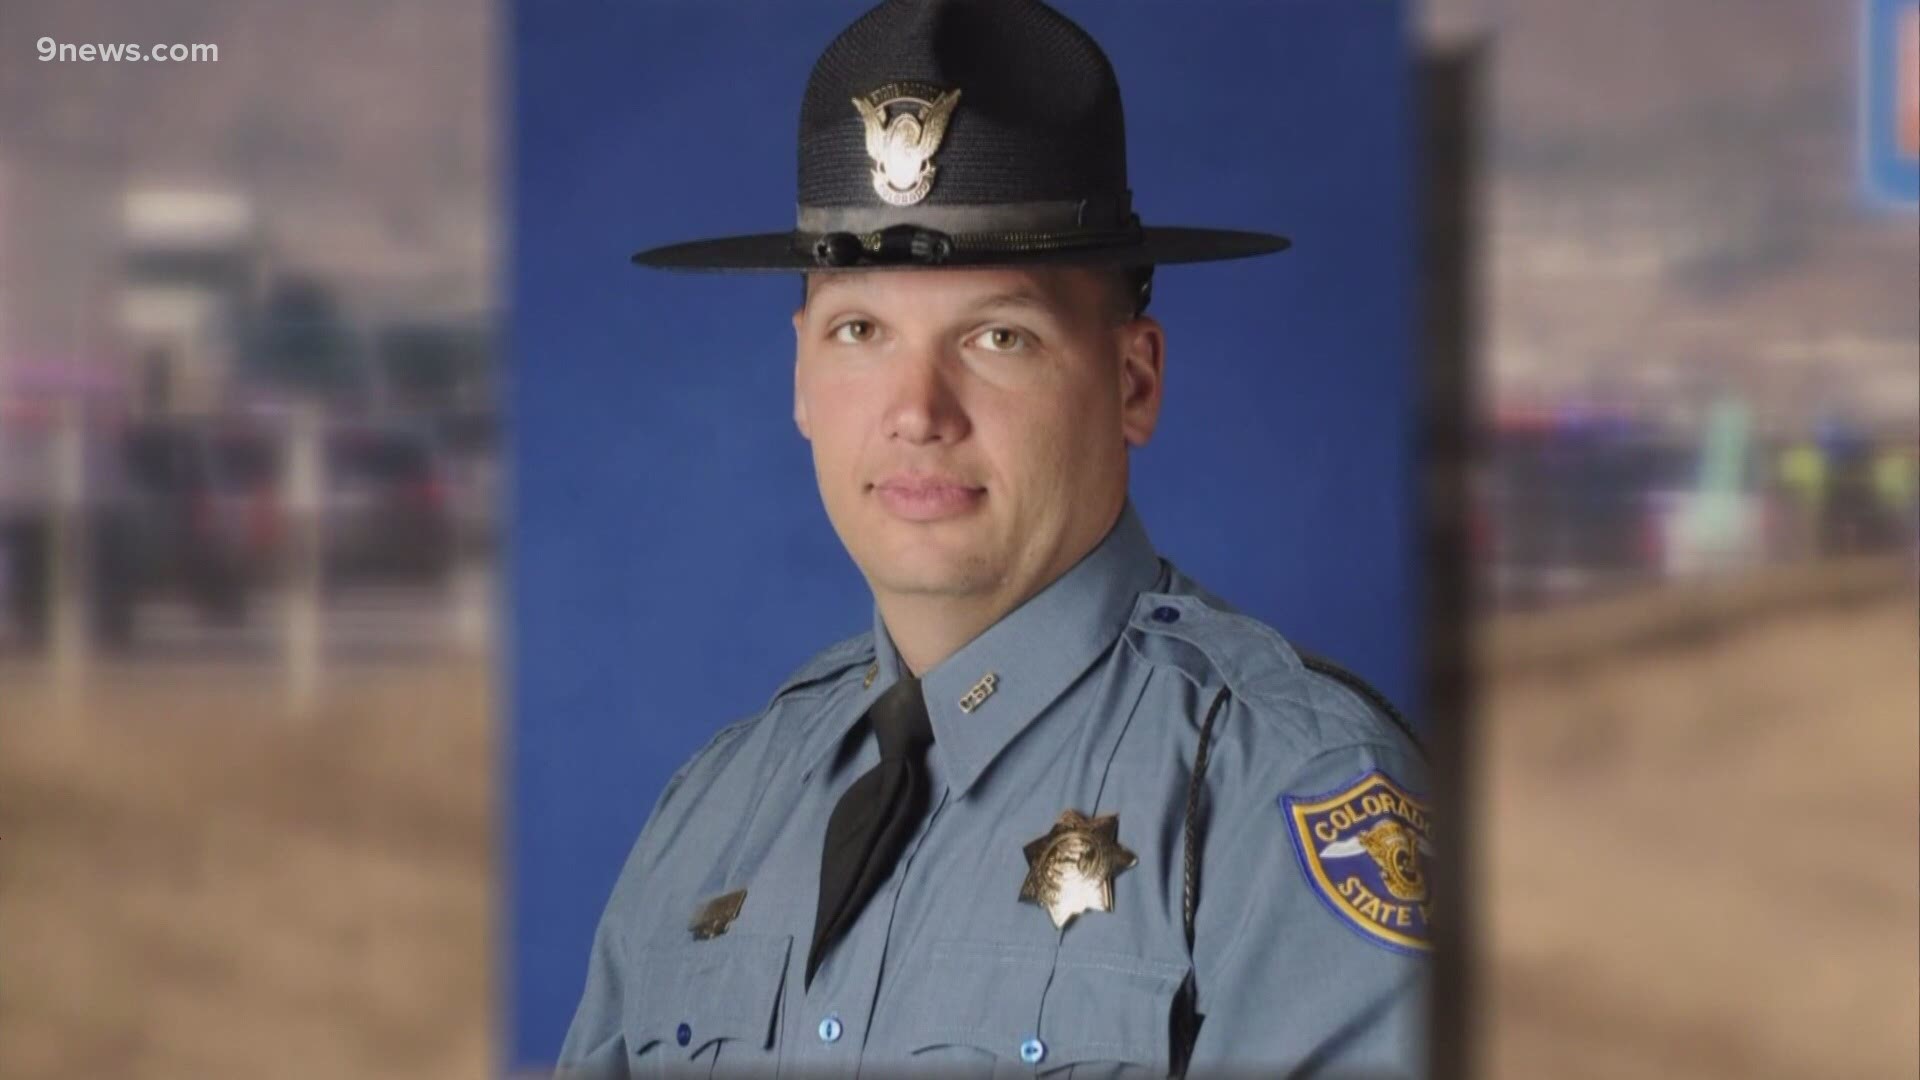 Jury selection is set to begin Monday for the driver accused of hitting and killing a Colorado State Trooper with his box truck on Interstate 25 in 2016.